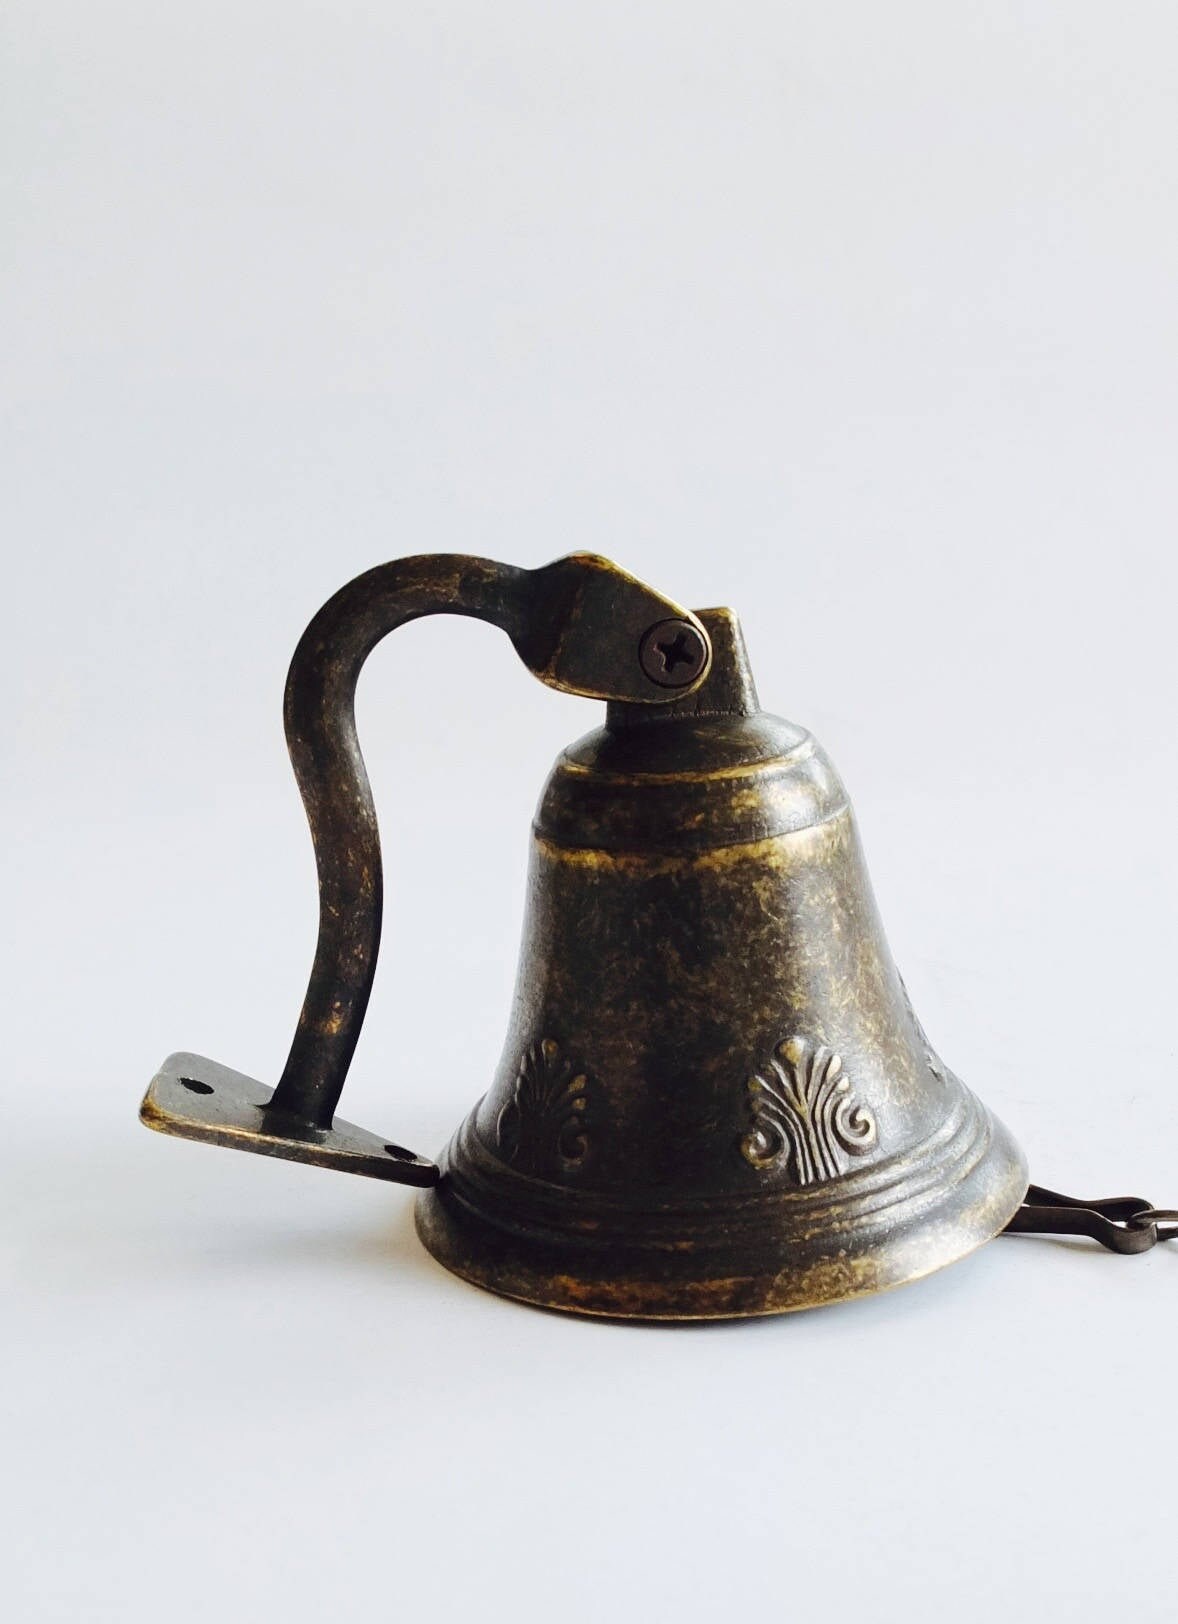 Golden Brass Wall Decor Hanging Bell at Rs 900/piece in Udaipur